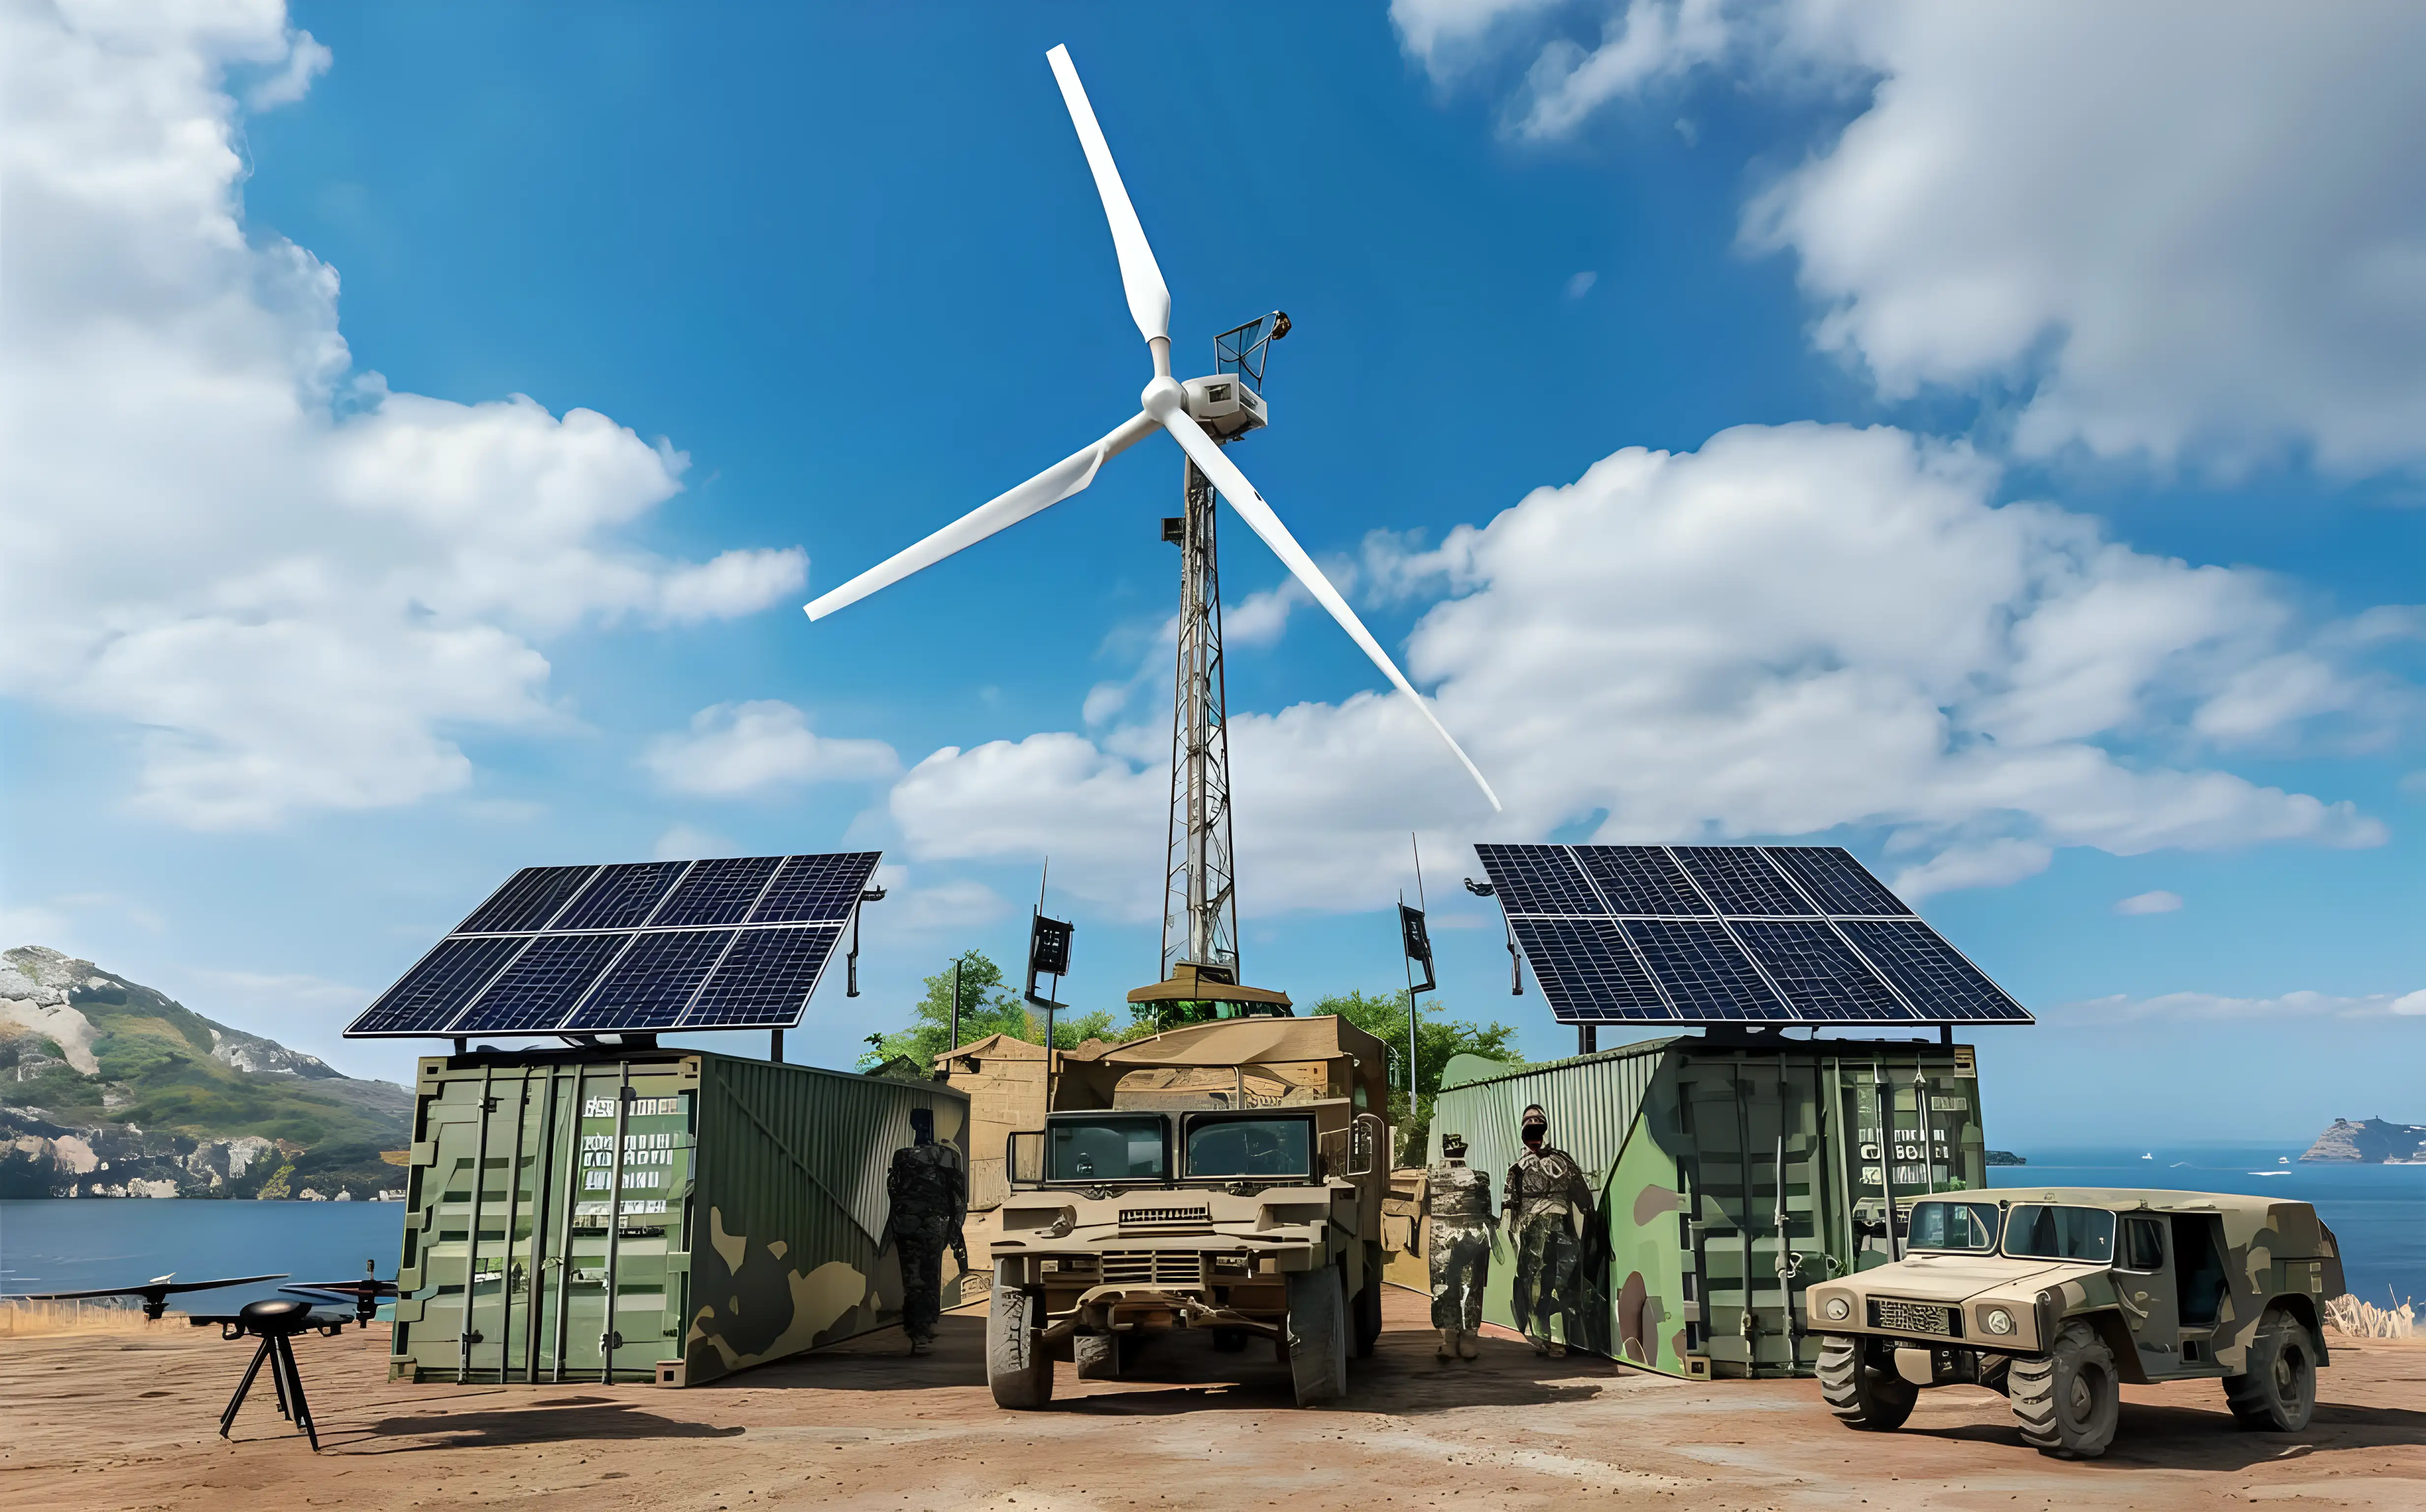 A military outpost at a Greek island equipped with a medium sized 3 bladed HAWT wind turbine and 2 shipping containers in camo paint with solar panels on their roofs. Next to them a drone and a humvee and a few soldiers 